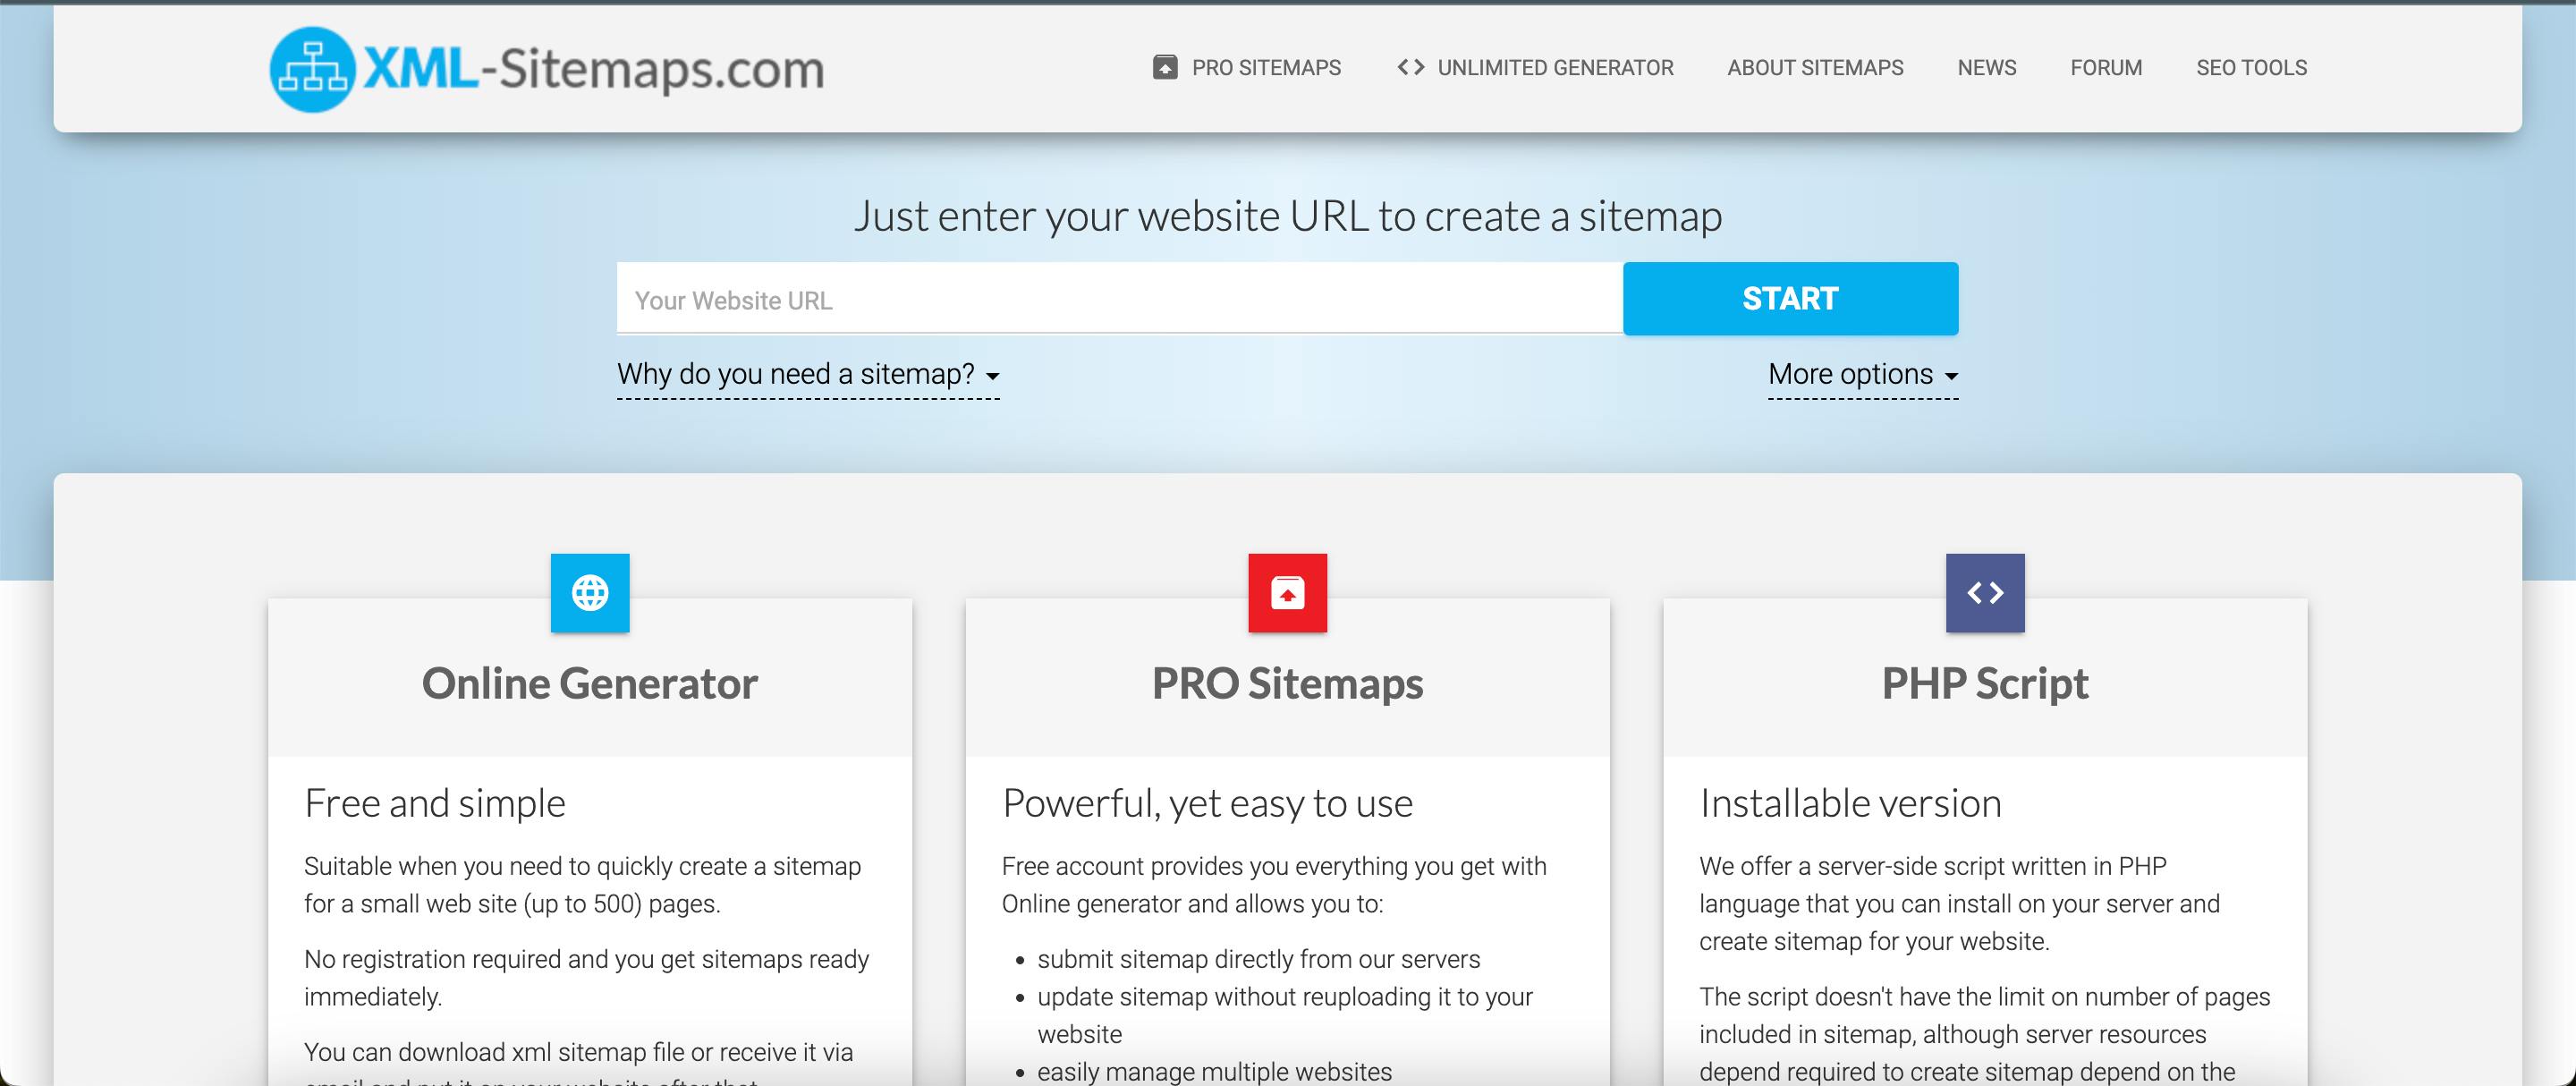 Sitemaps.com to create a sitemap for your photography business